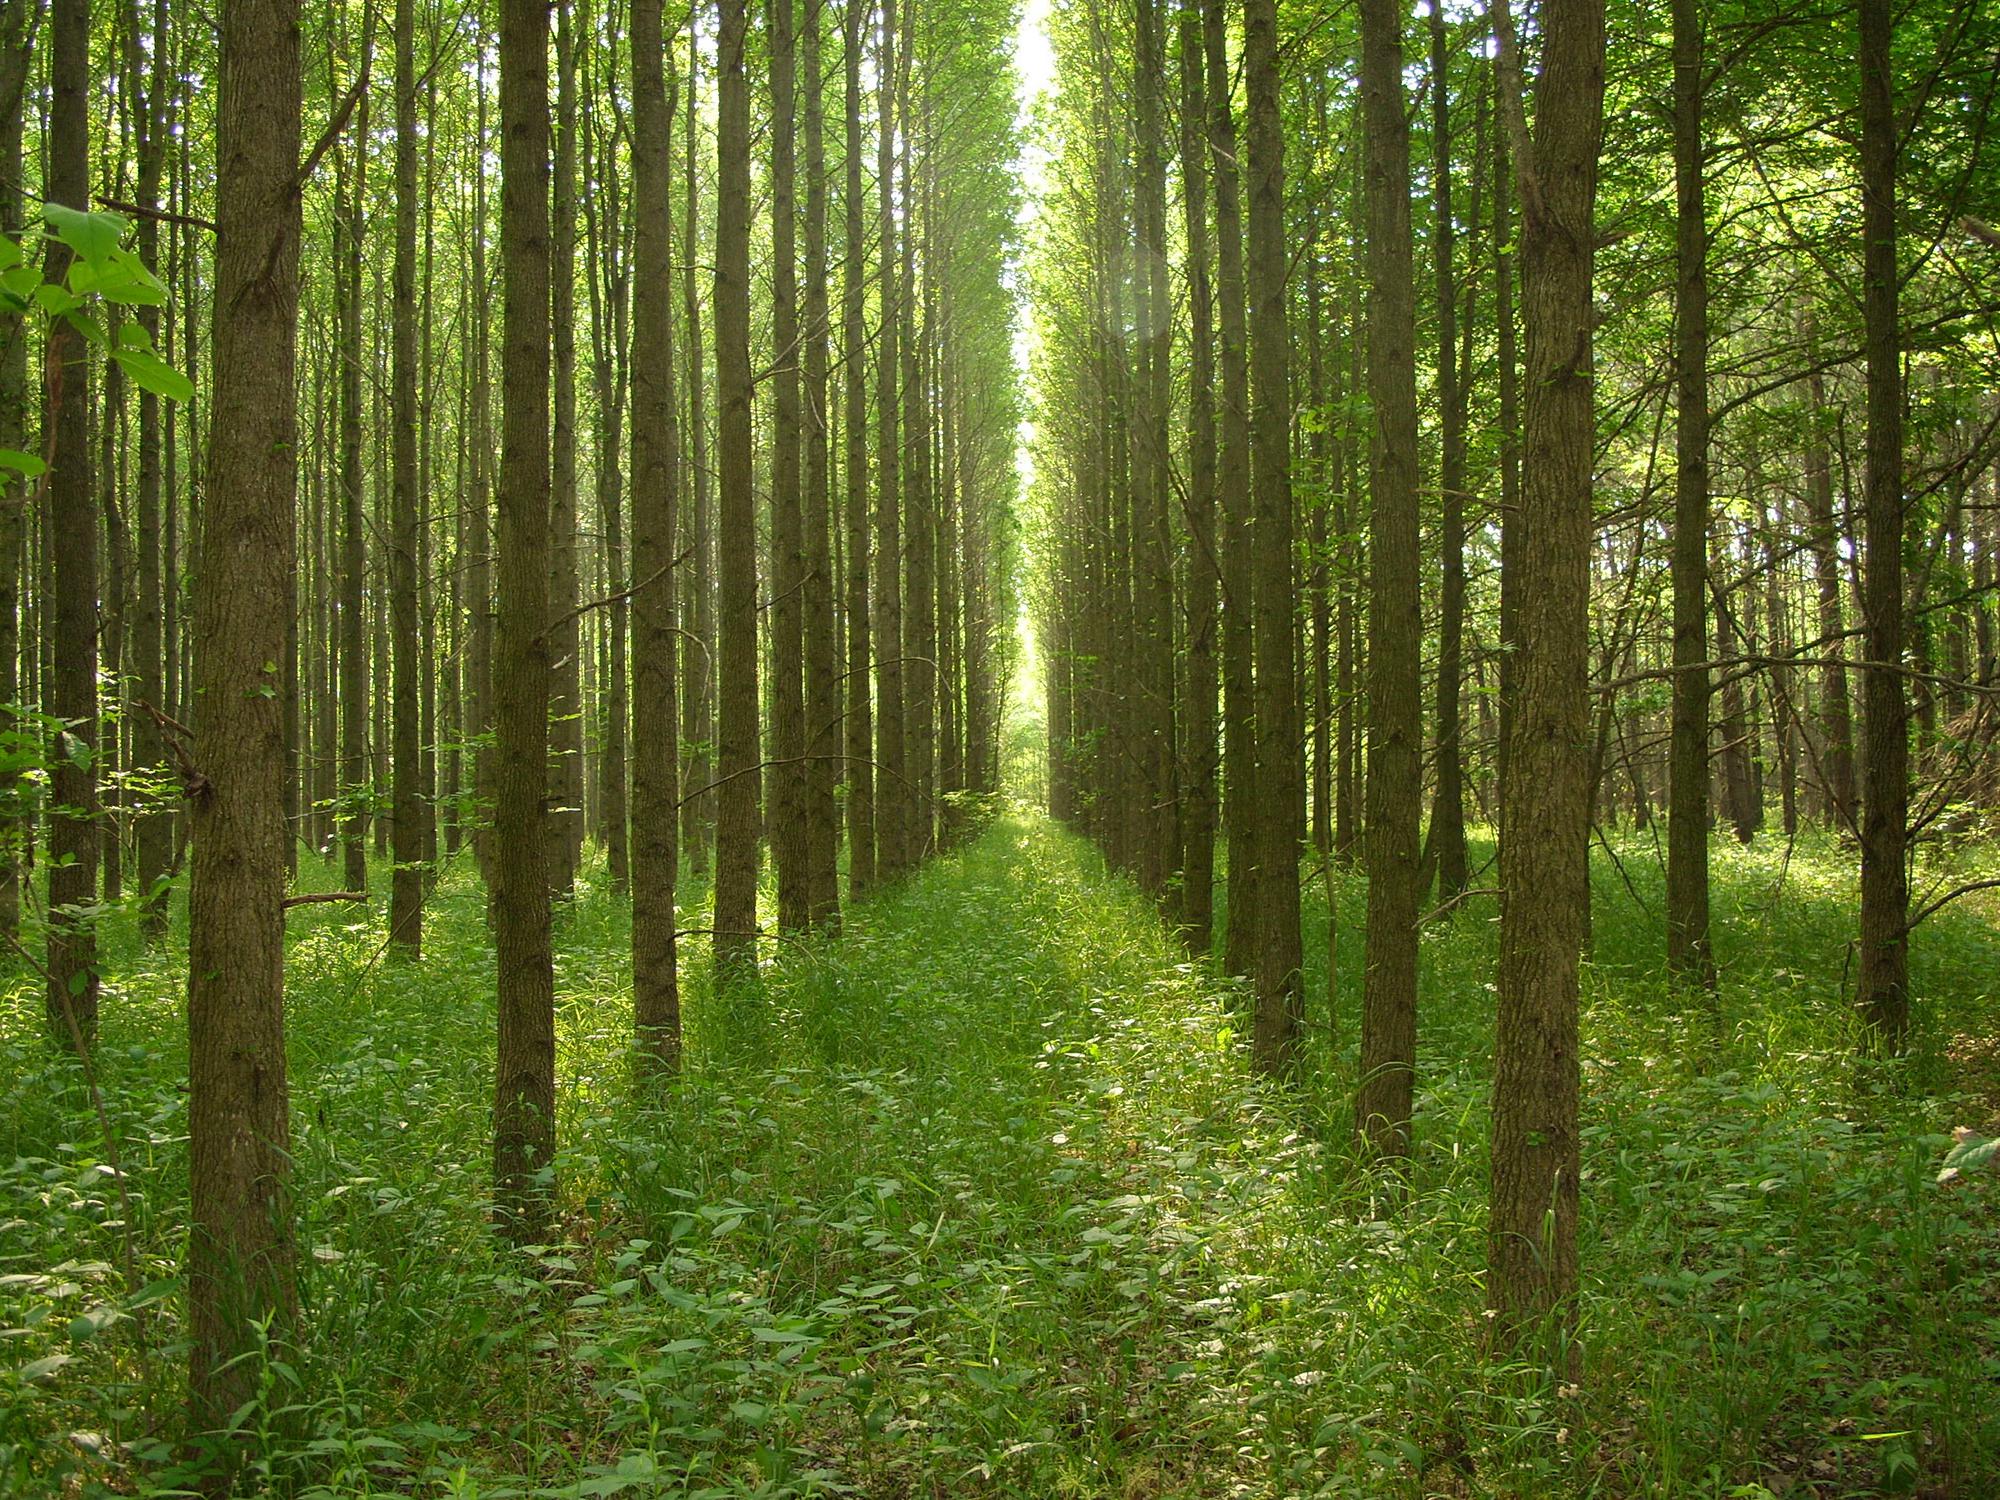 Medium-sized trees grow in straight rows as the sun highlights the green treetops and ground covering.